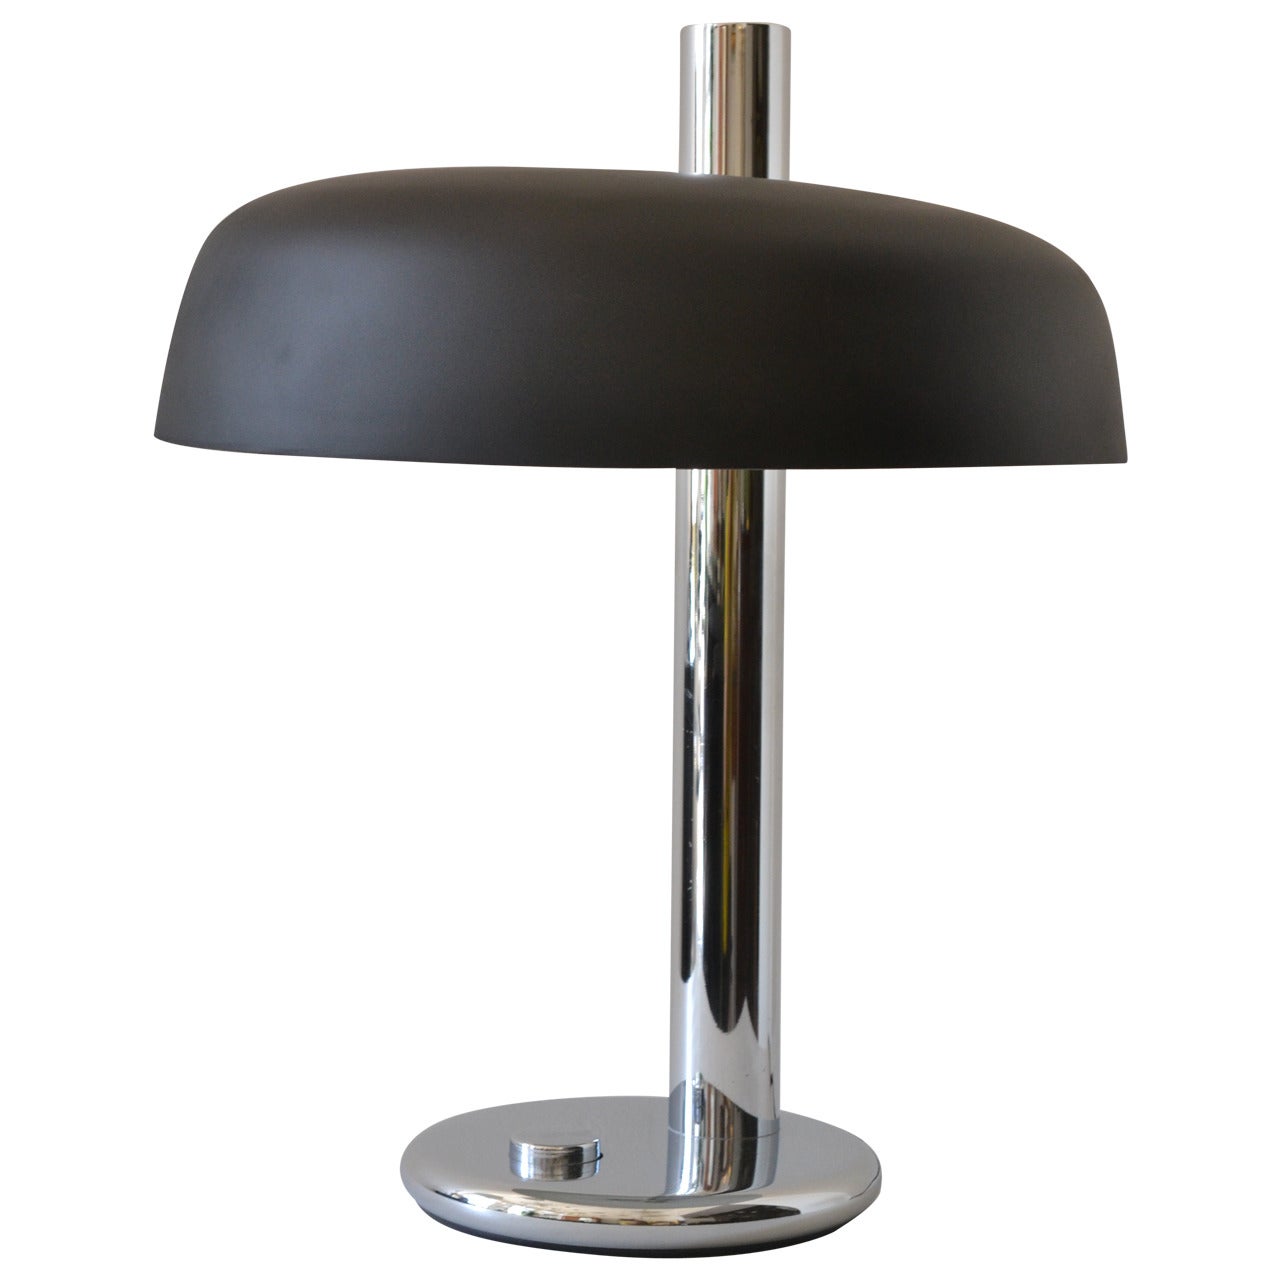 1930s American Modernist Nickel Plated Table Lamp